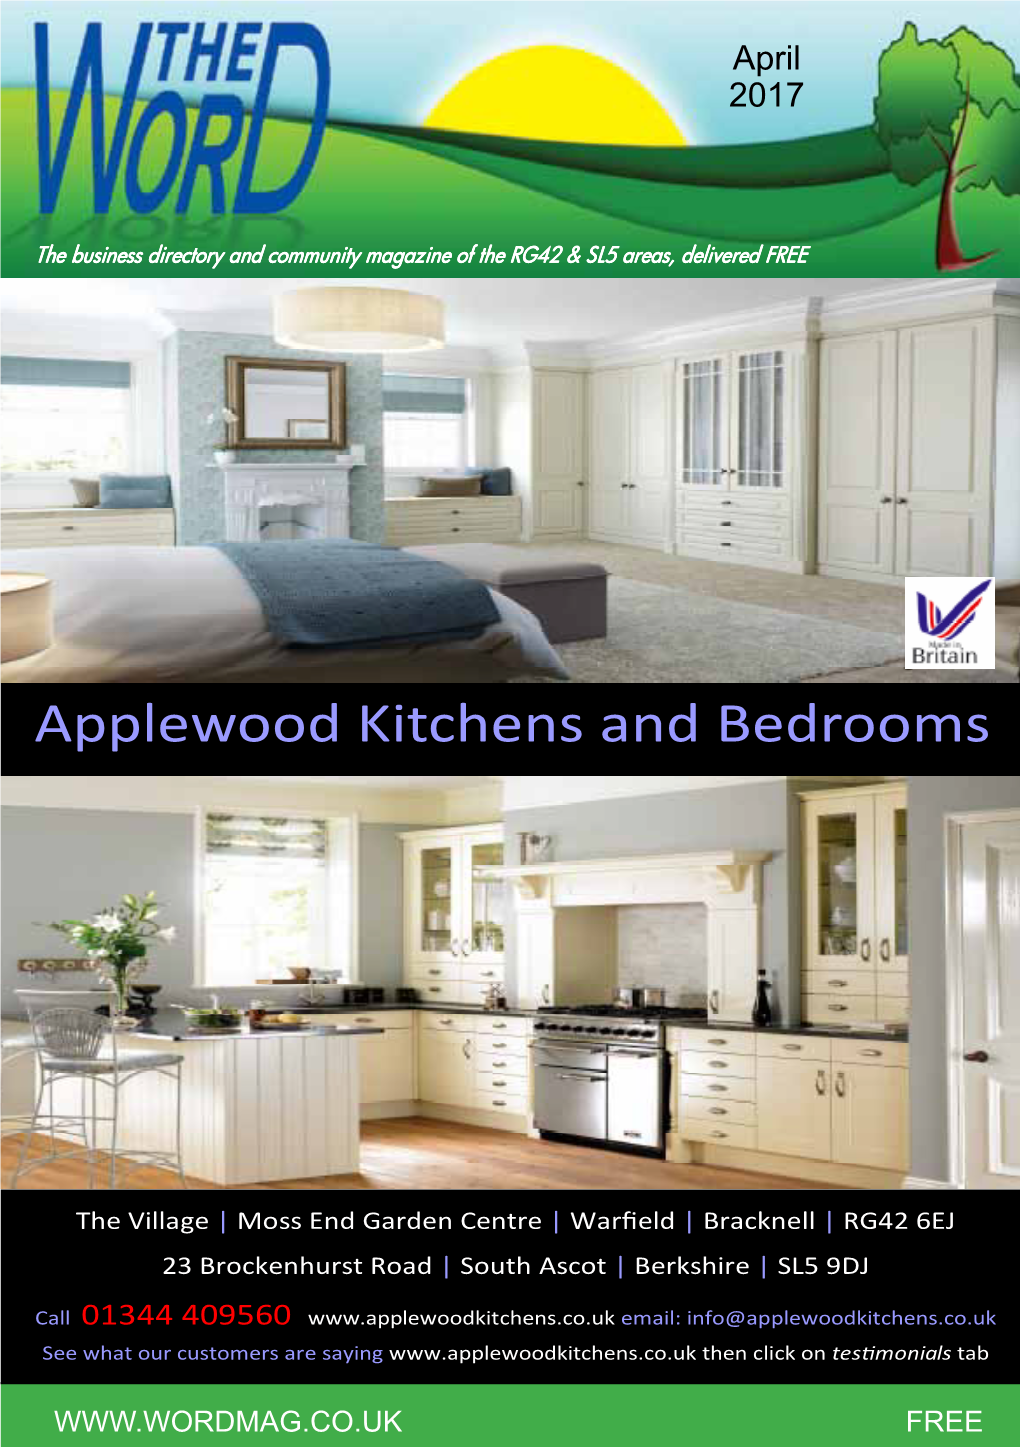 Applewood Kitchens and Bedrooms